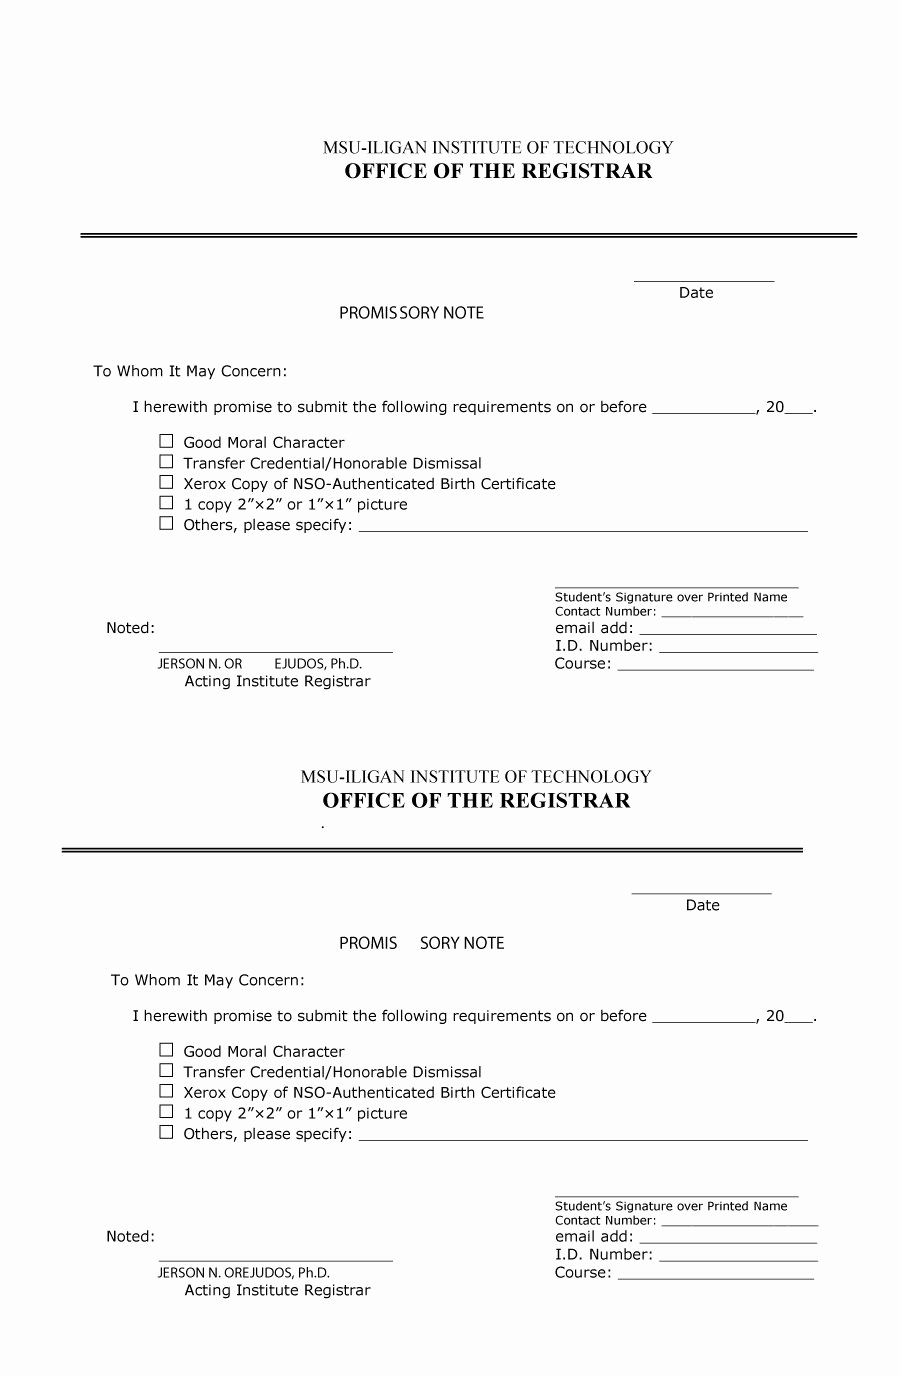 Promissory Note Template Free Download New 45 Free Promissory Note Templates &amp; forms [word &amp; Pdf]